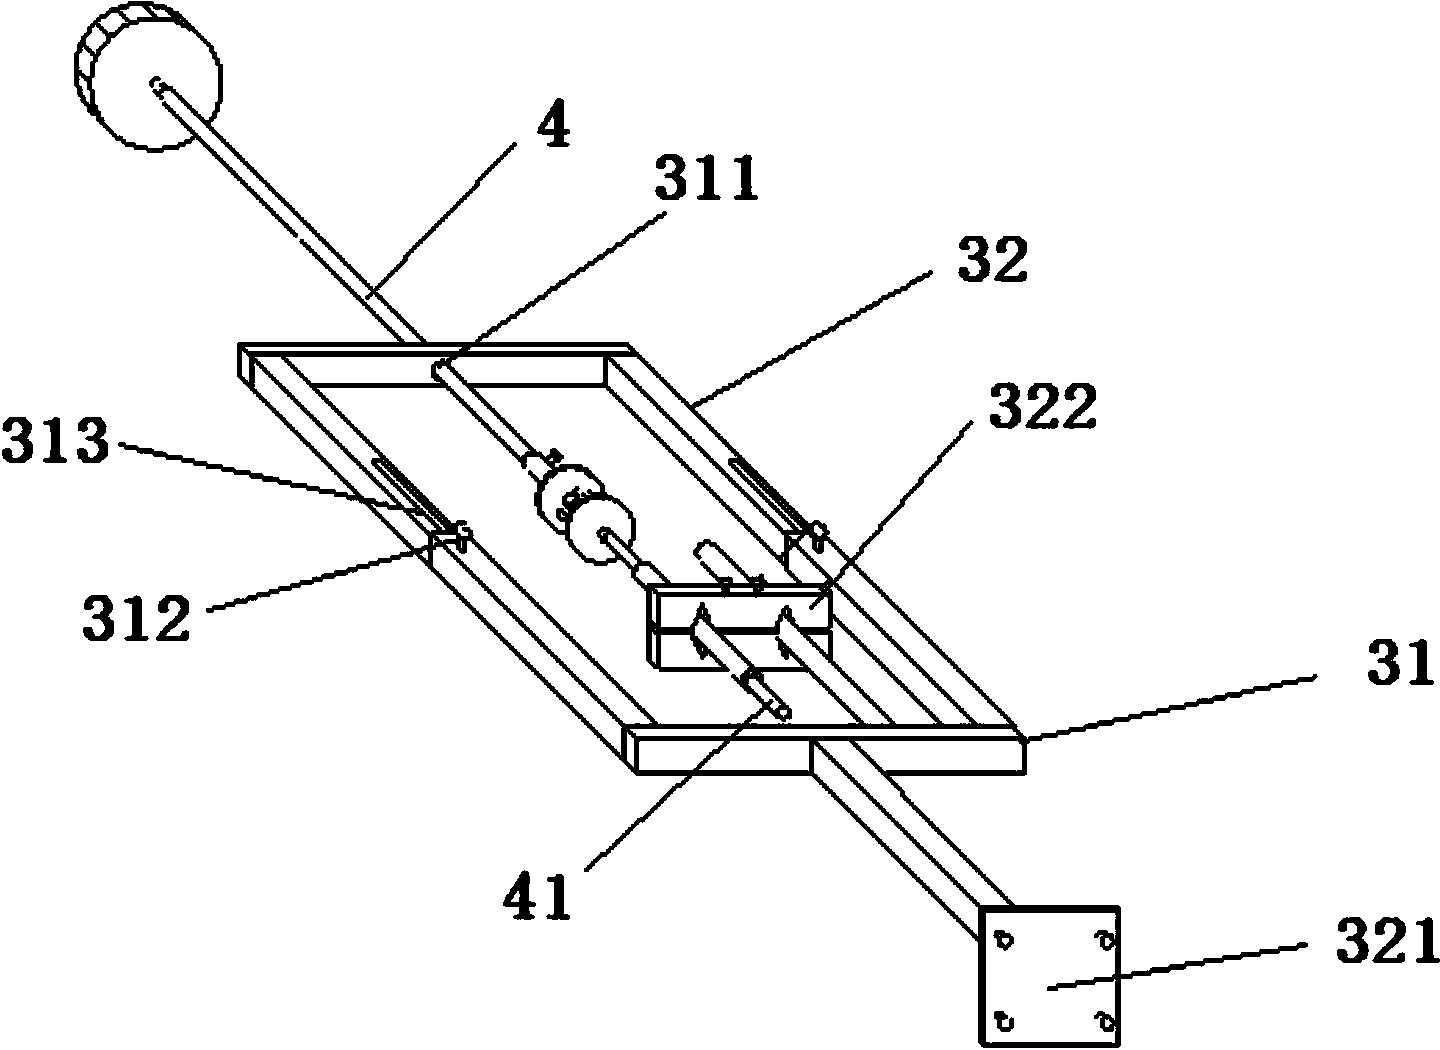 Experimental device with soil horizontal displacement and pressure integrated observation assembly